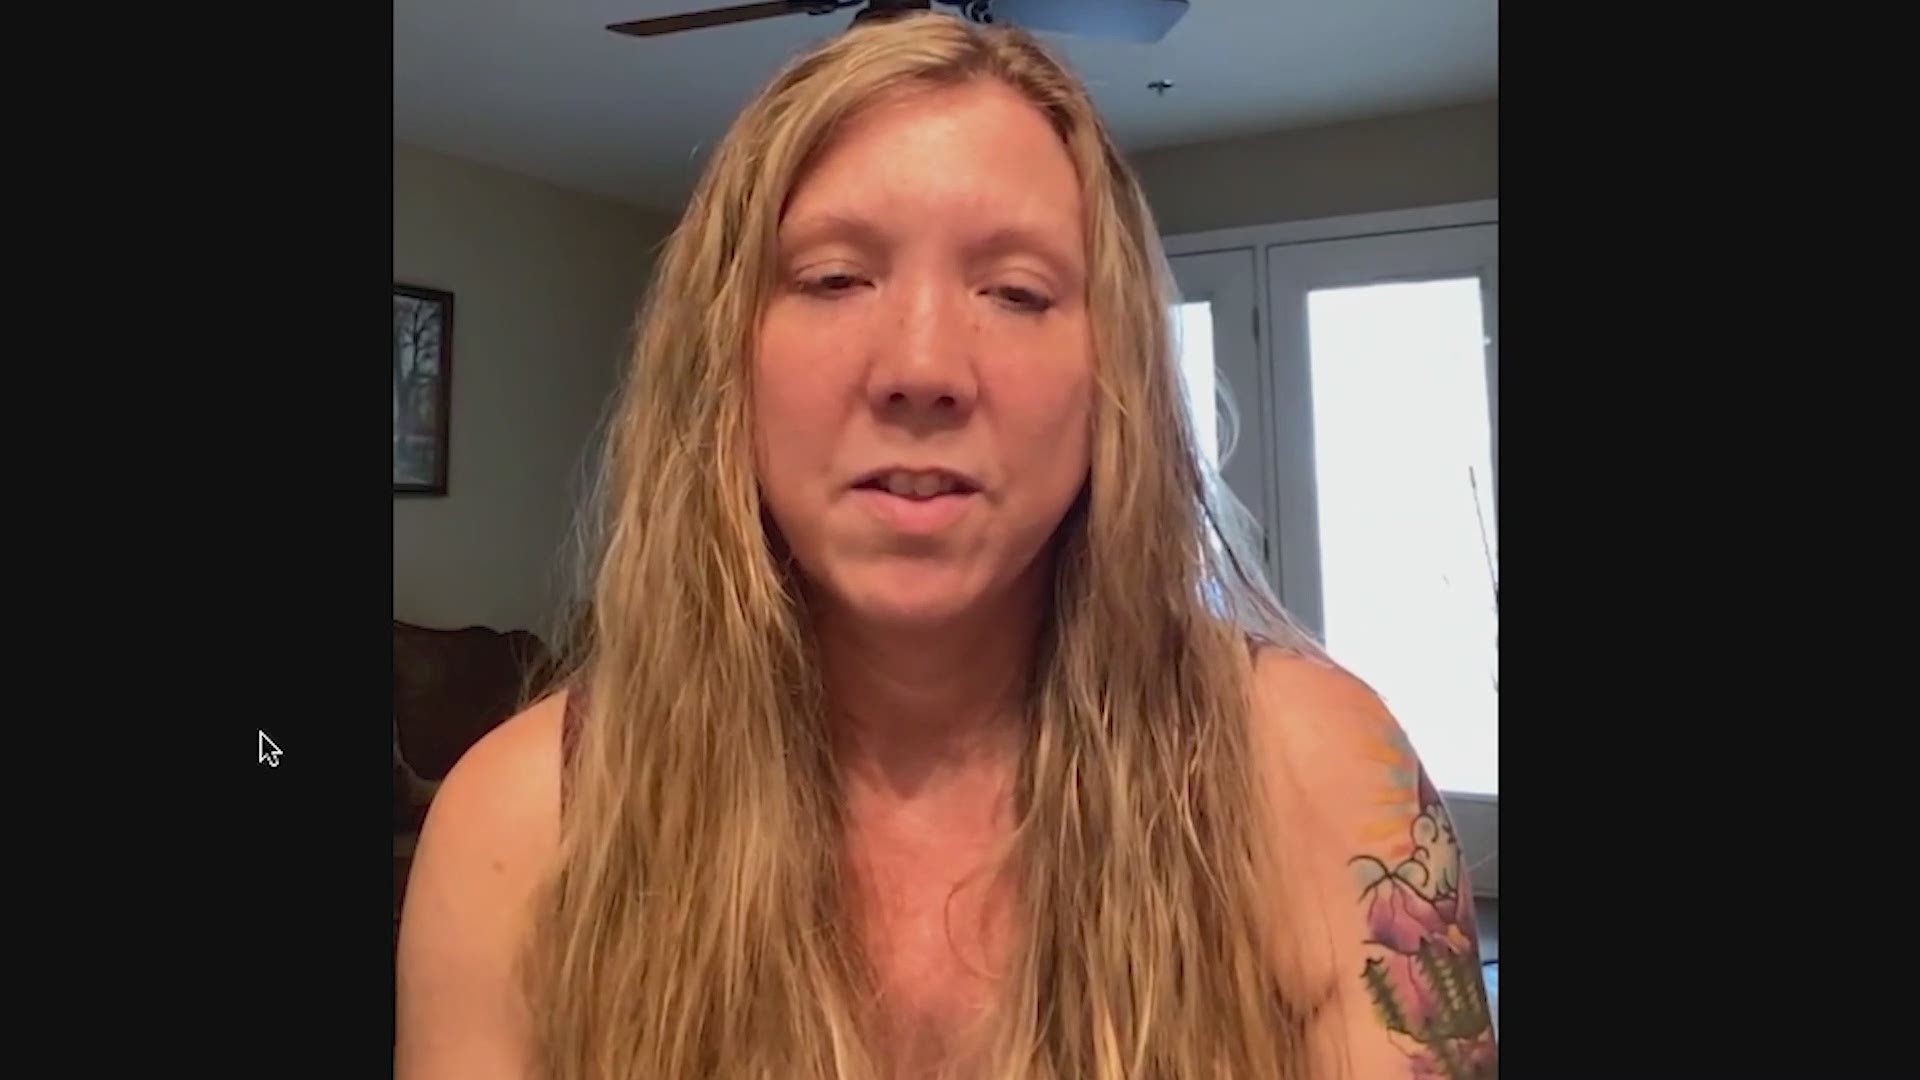 A month ago, Gretchen Pardon set out on the nearly 2,200-mile Appalachian Trail thru-hike. Nearly 300 miles in, she returned home amid COVID-19 concerns.